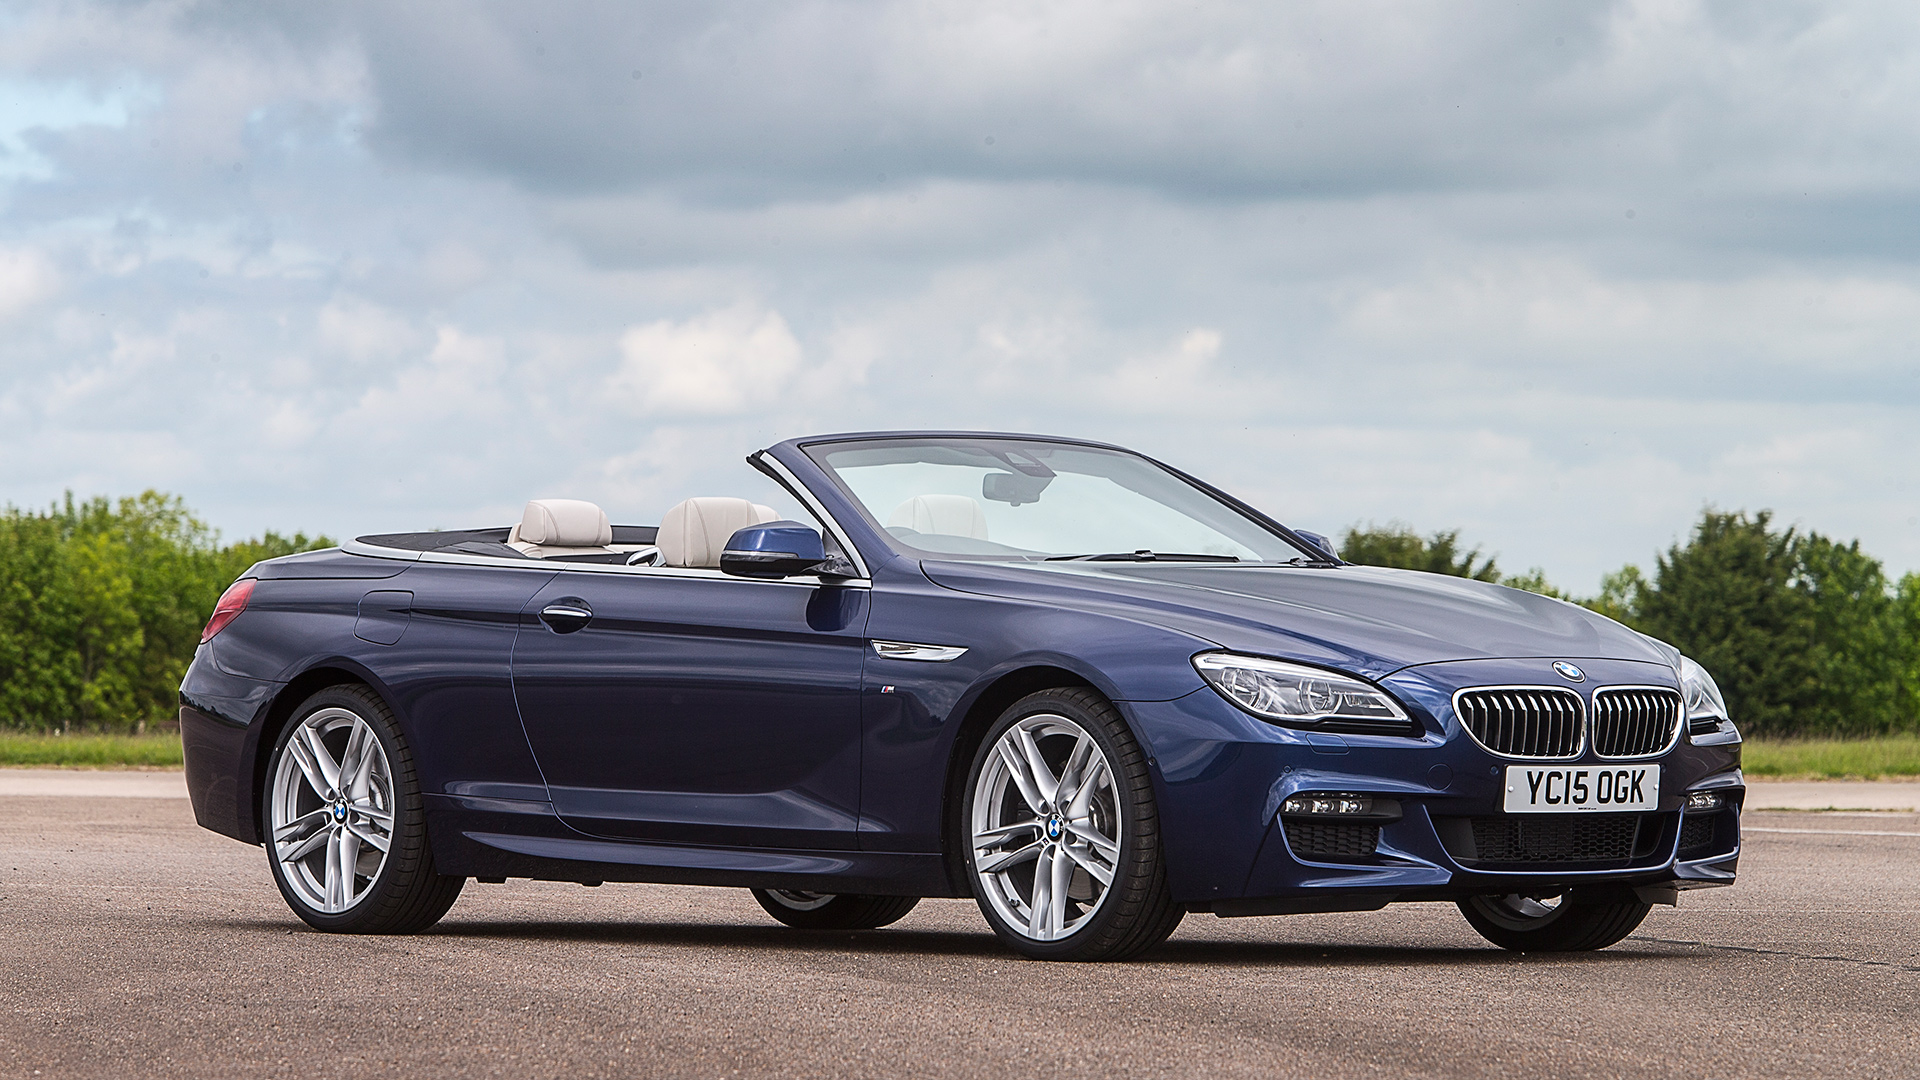 Used Petrol BMW 6 Series Convertible Cars For Sale | AutoTrader UK